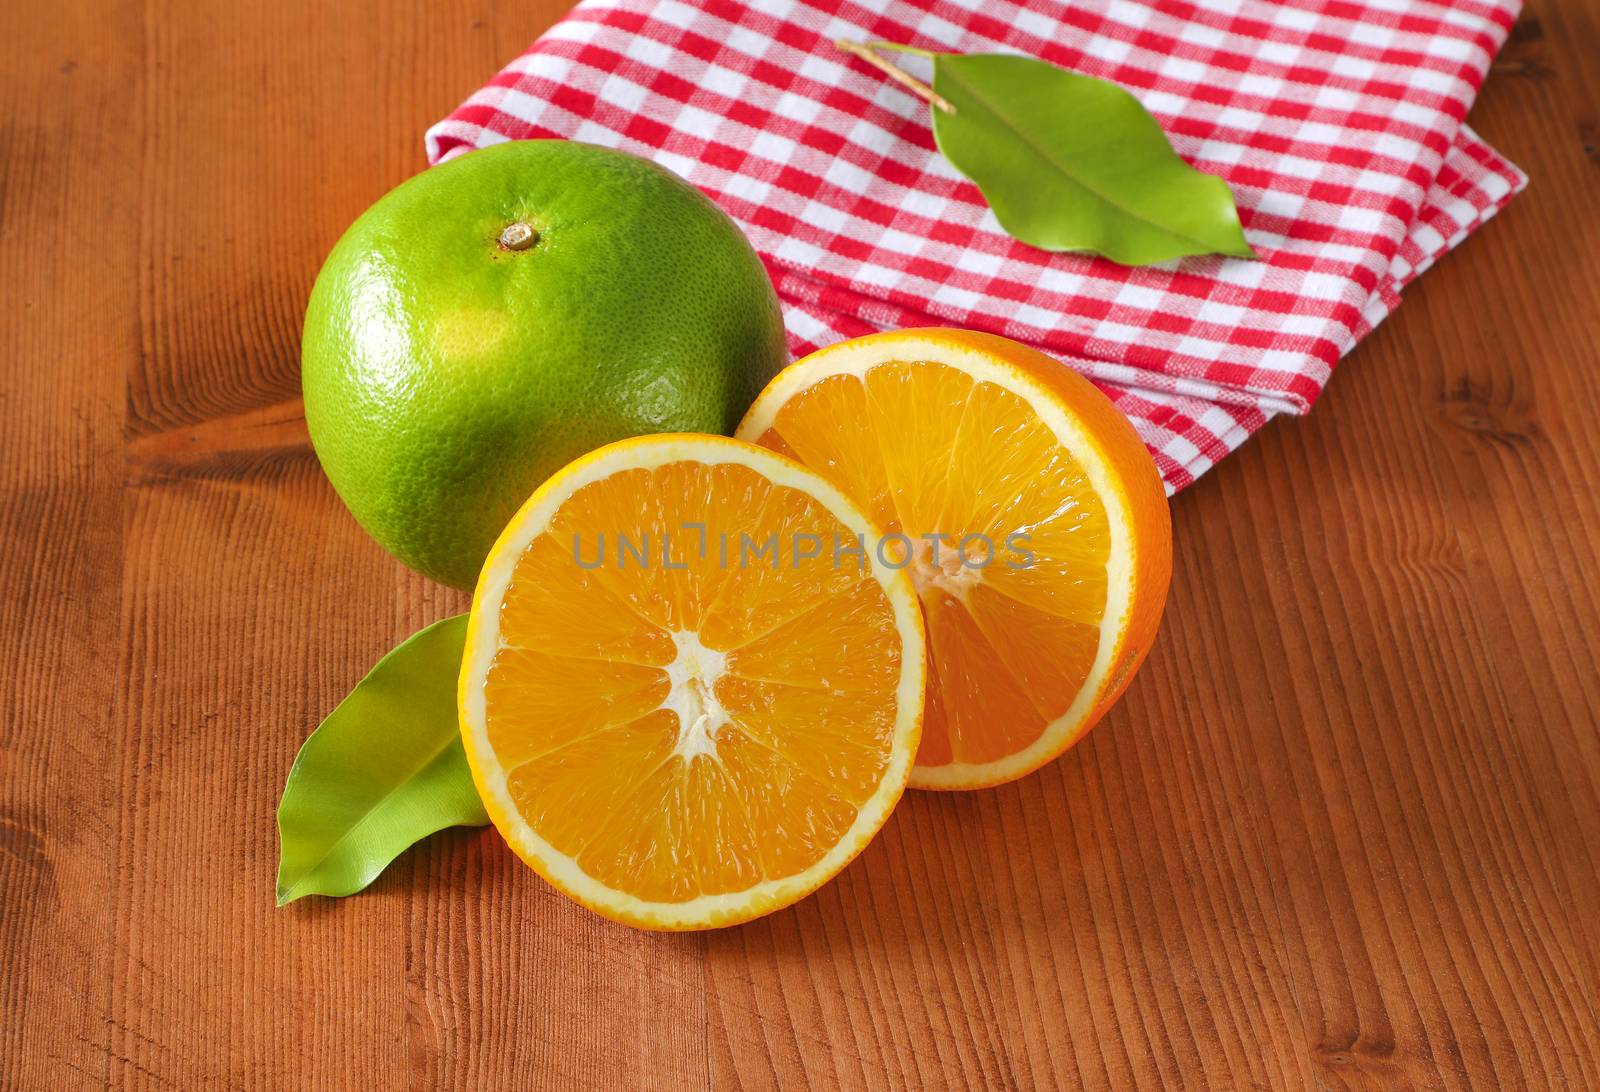 Green grapefruit (sweetie, pomelit, oroblanco), two orange halves and checked red and white tea towel on wooden table